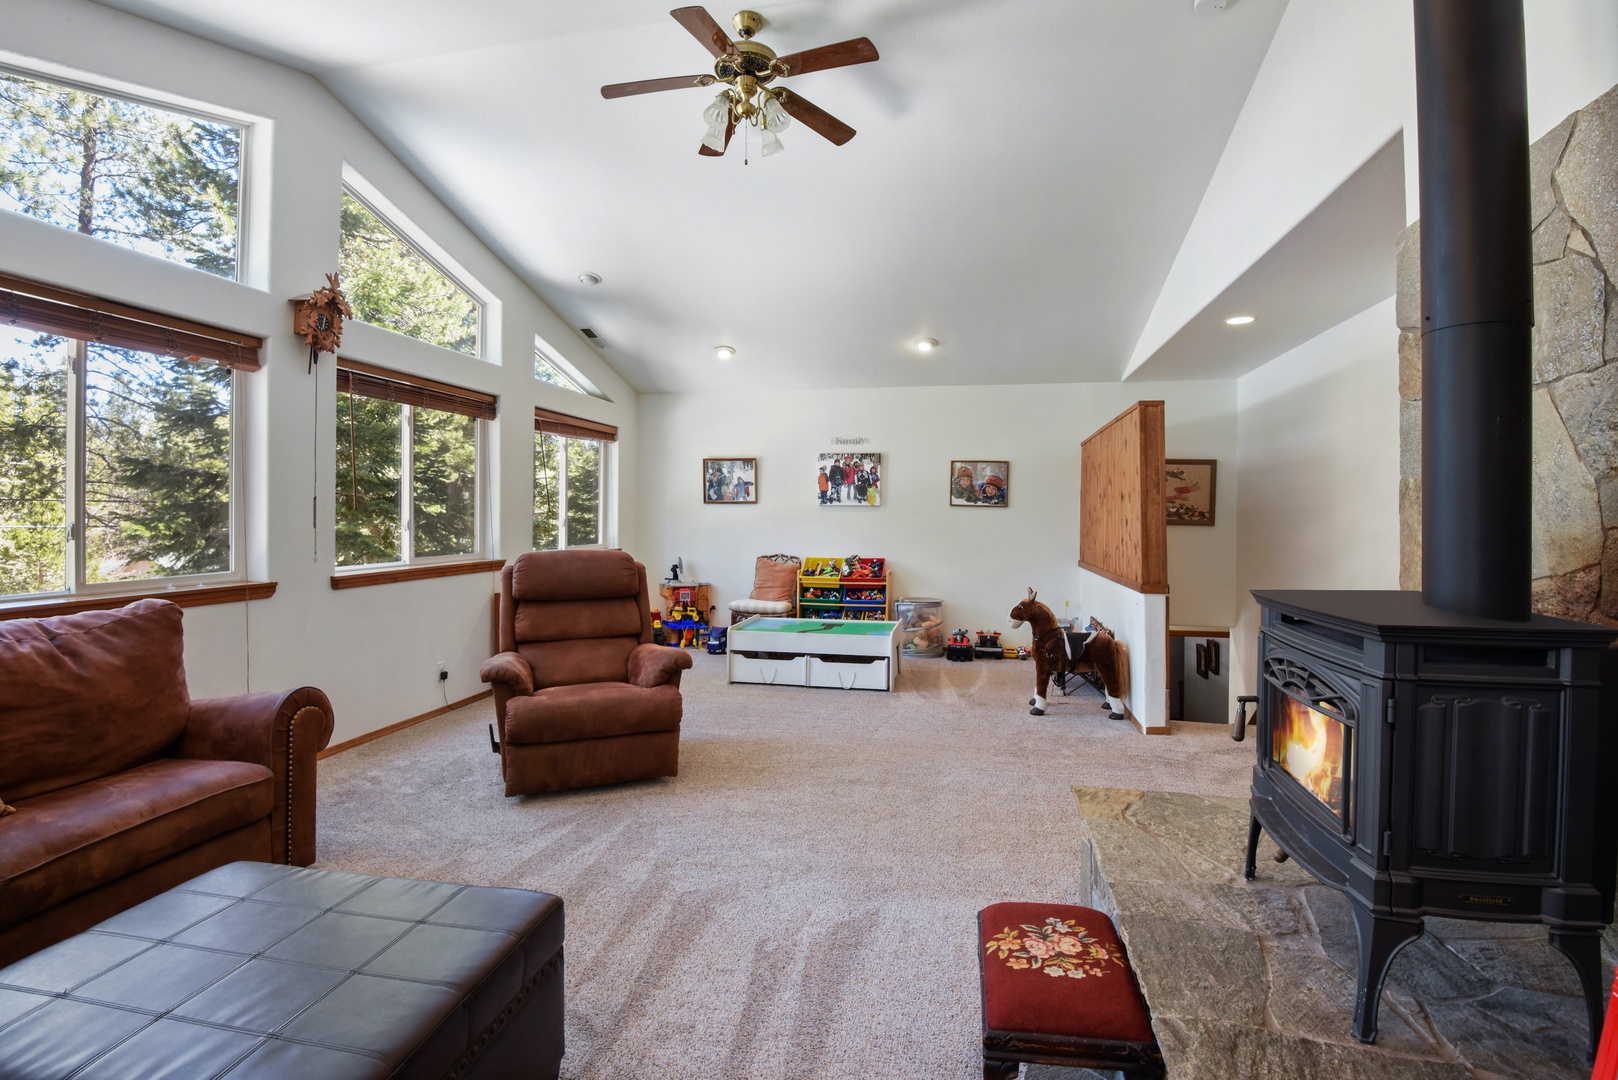 2nd living room with wood burning fireplace, Smart TV, kids play area